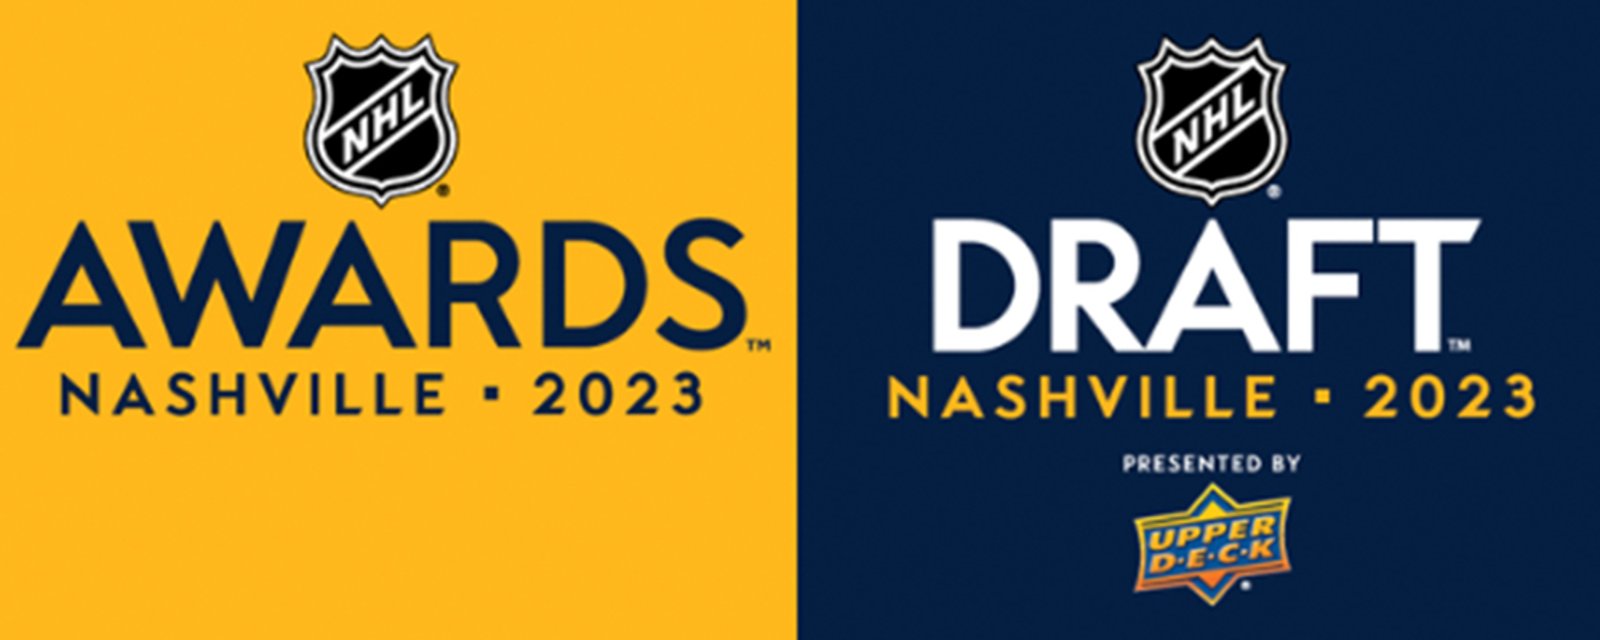 NHL Draft and Awards Night heading to Nashville in 2023